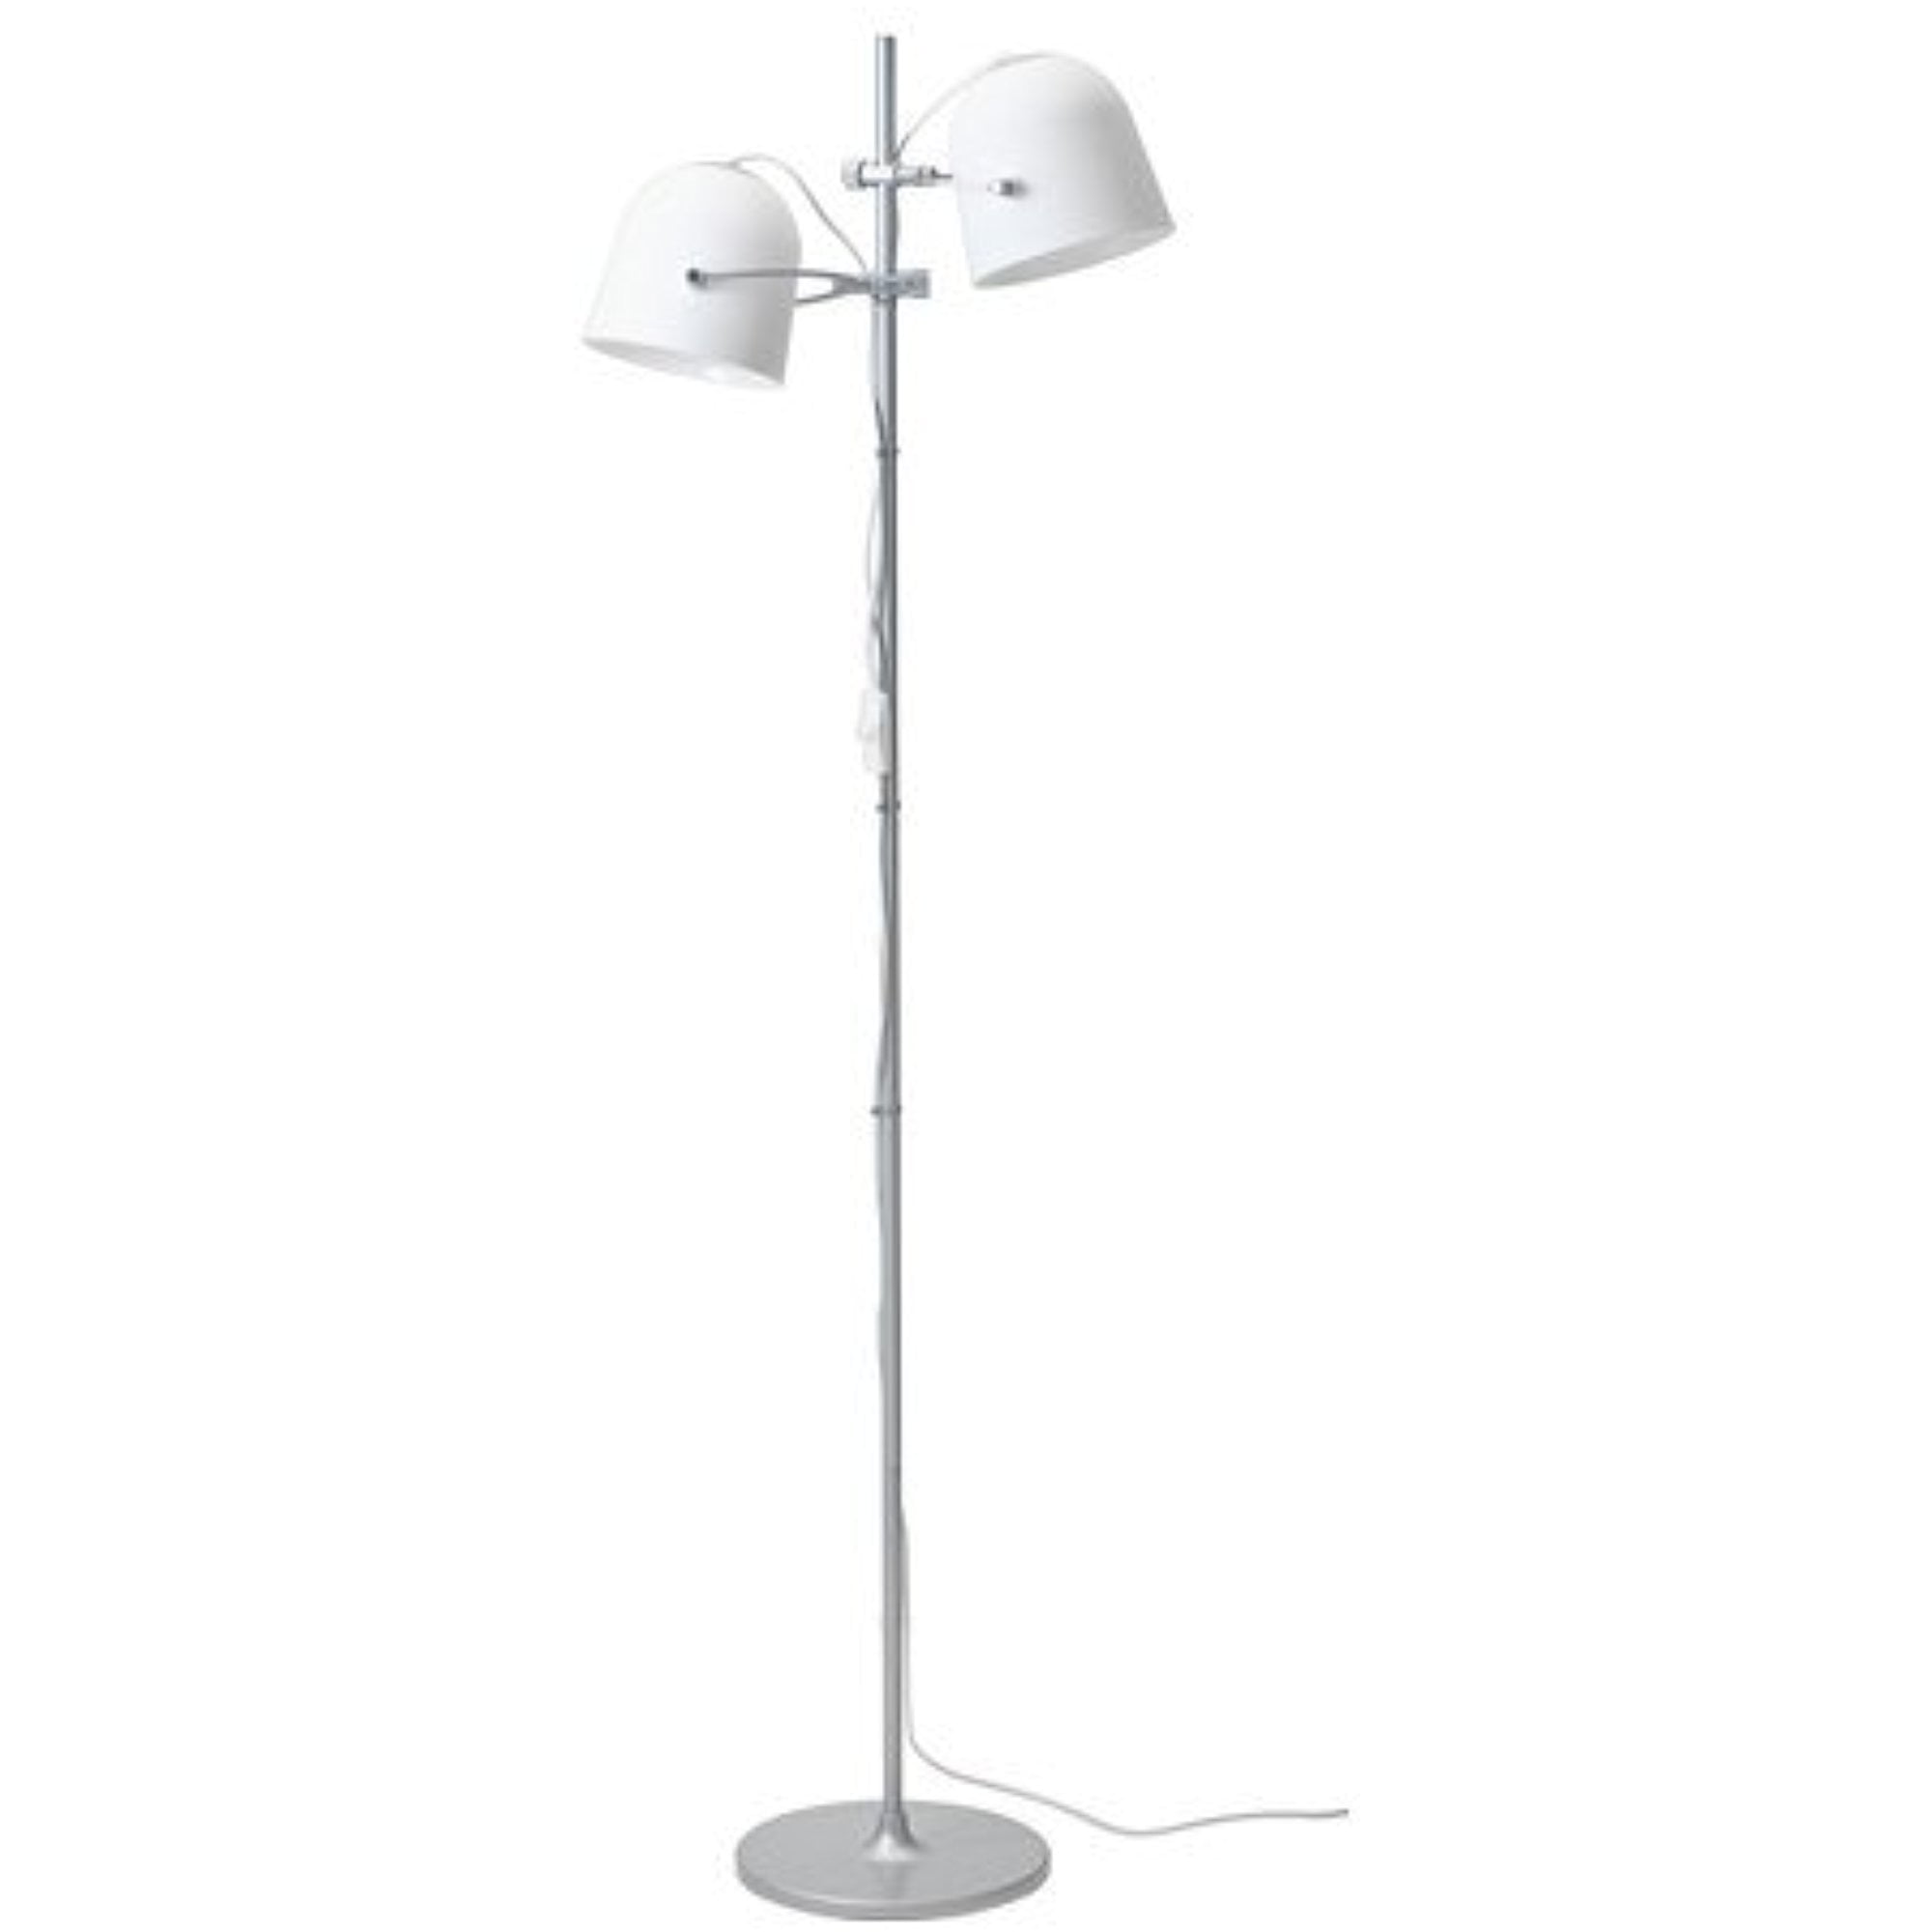 Ikea Floor Lamp With 2 Shades White, Battery Operated Floor Lamps Ikea